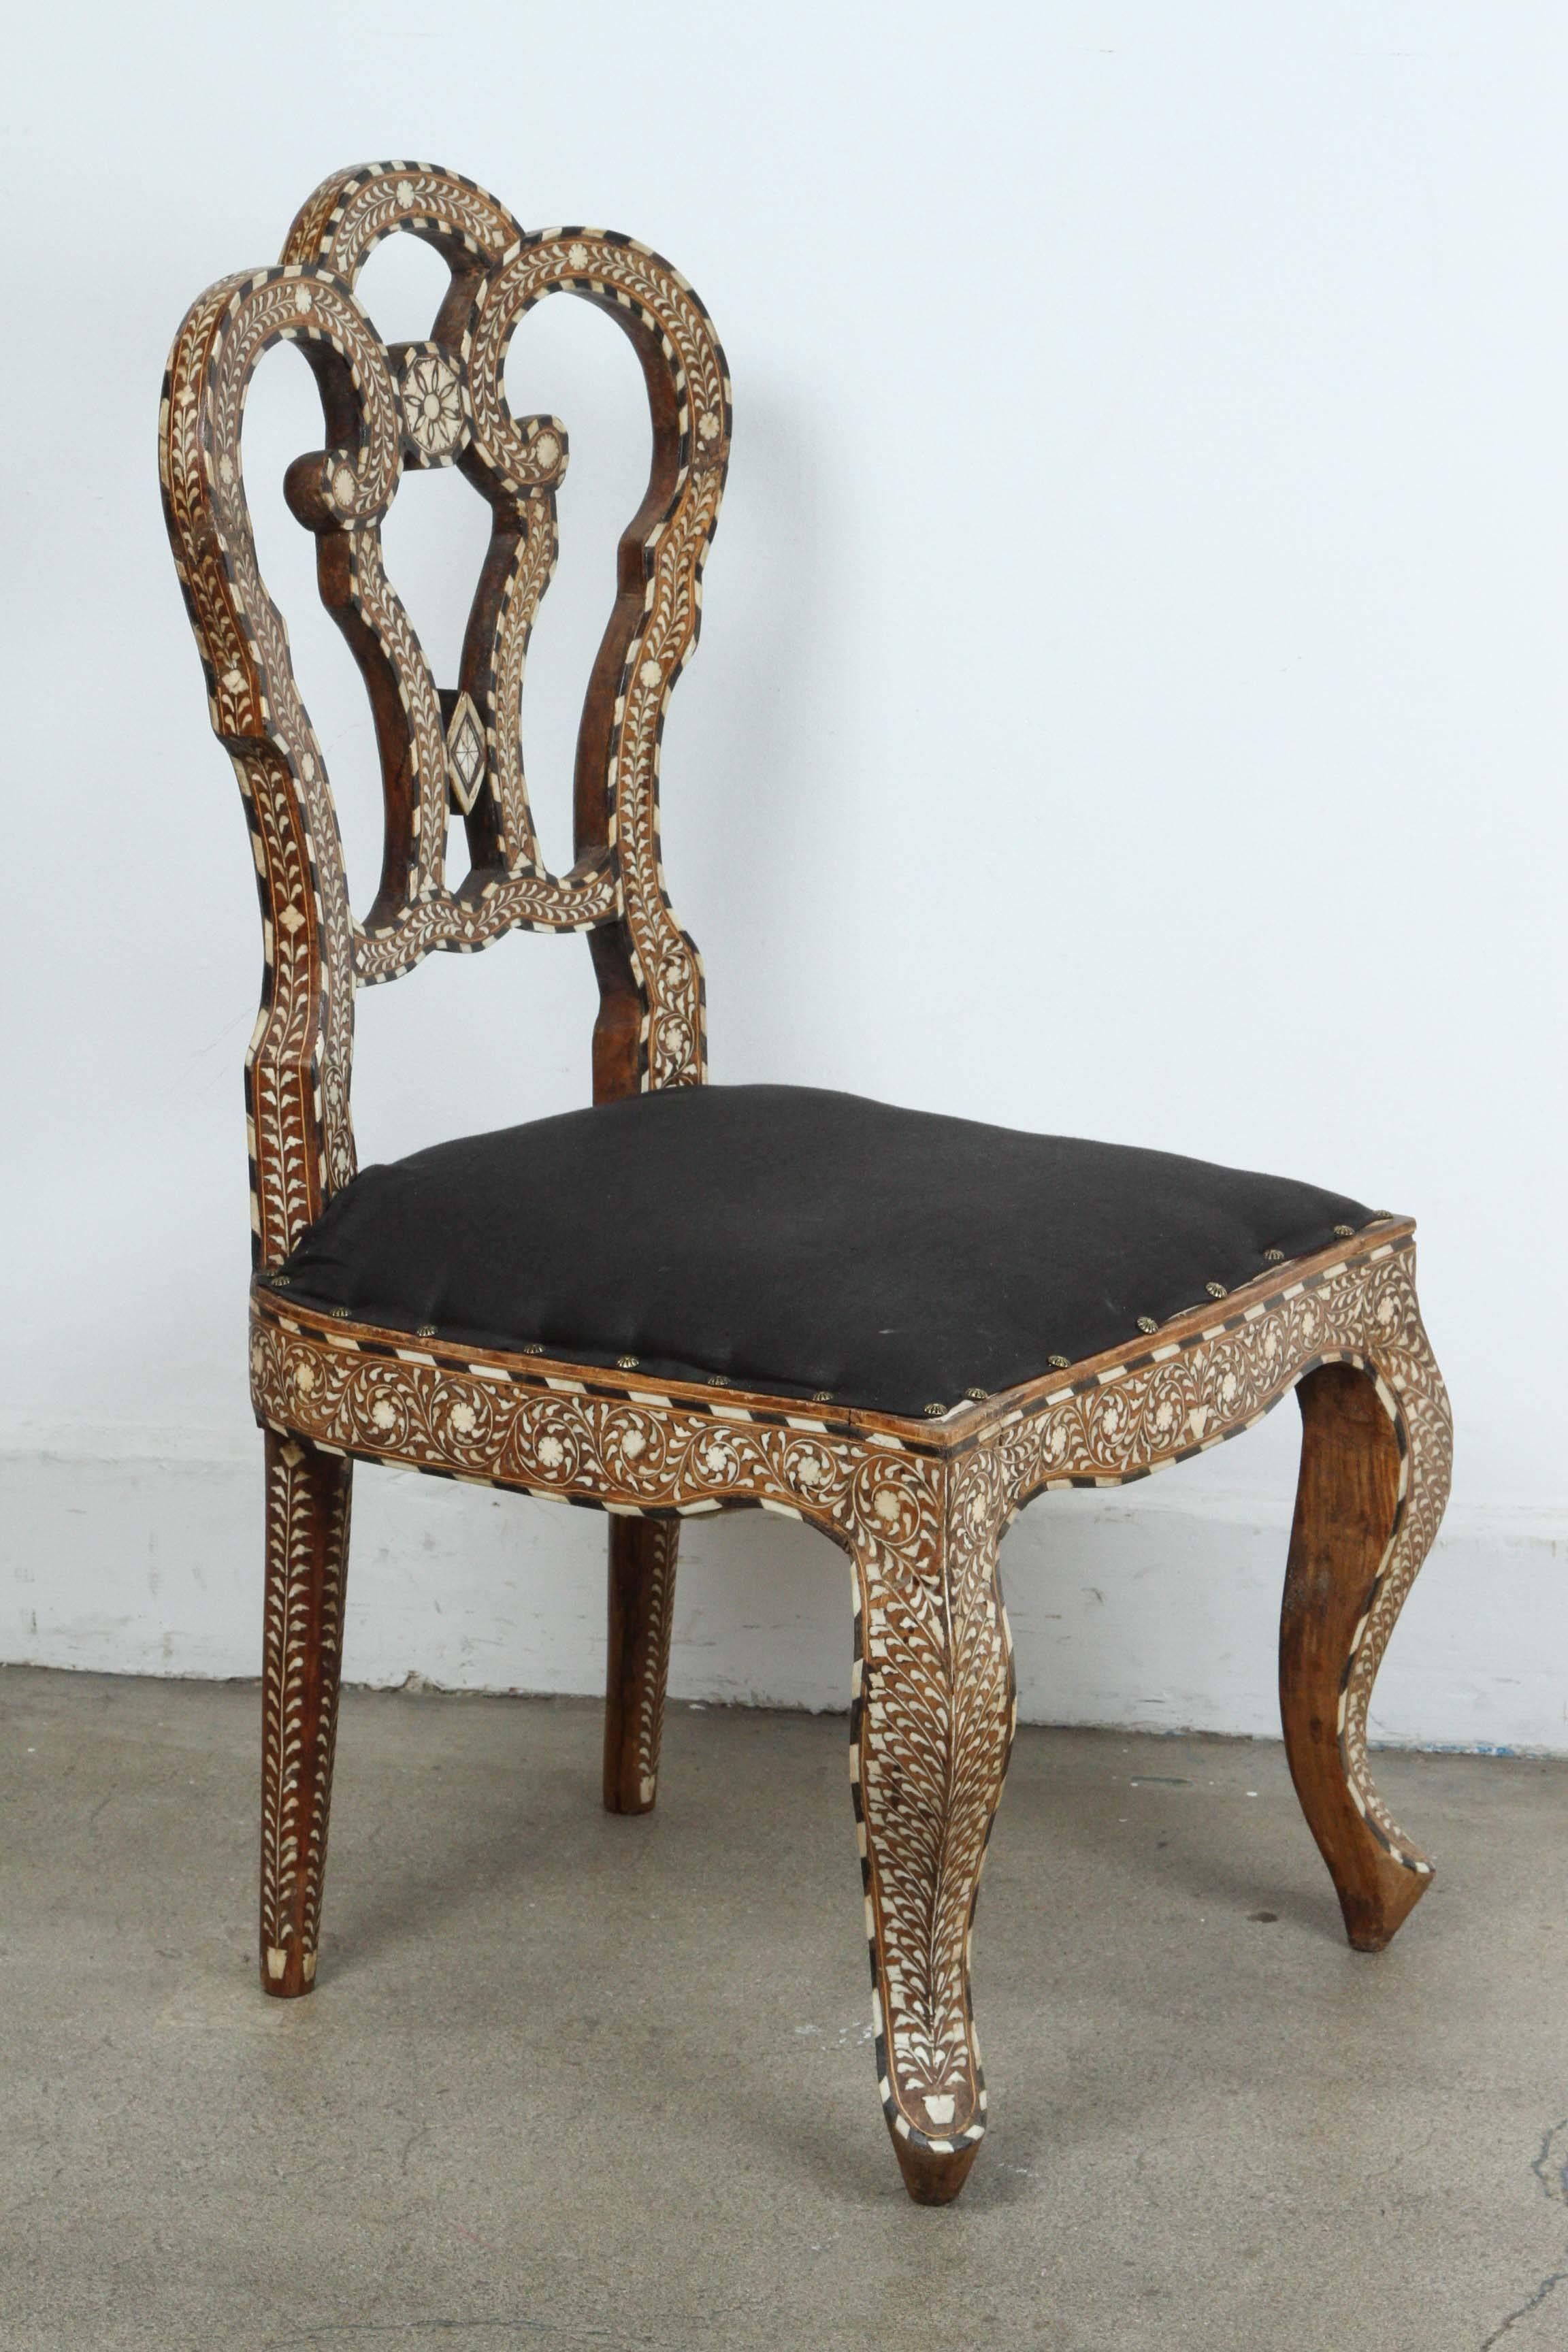 19th Century Anglo-Indian ebony and bone inlay side chair.
Inlaid throughout with scrolling vine-work and flower-heads, open interlaced back and upholstered seat raised on front cabriole legs.
Some losses of ebony and bone inlay, some structural